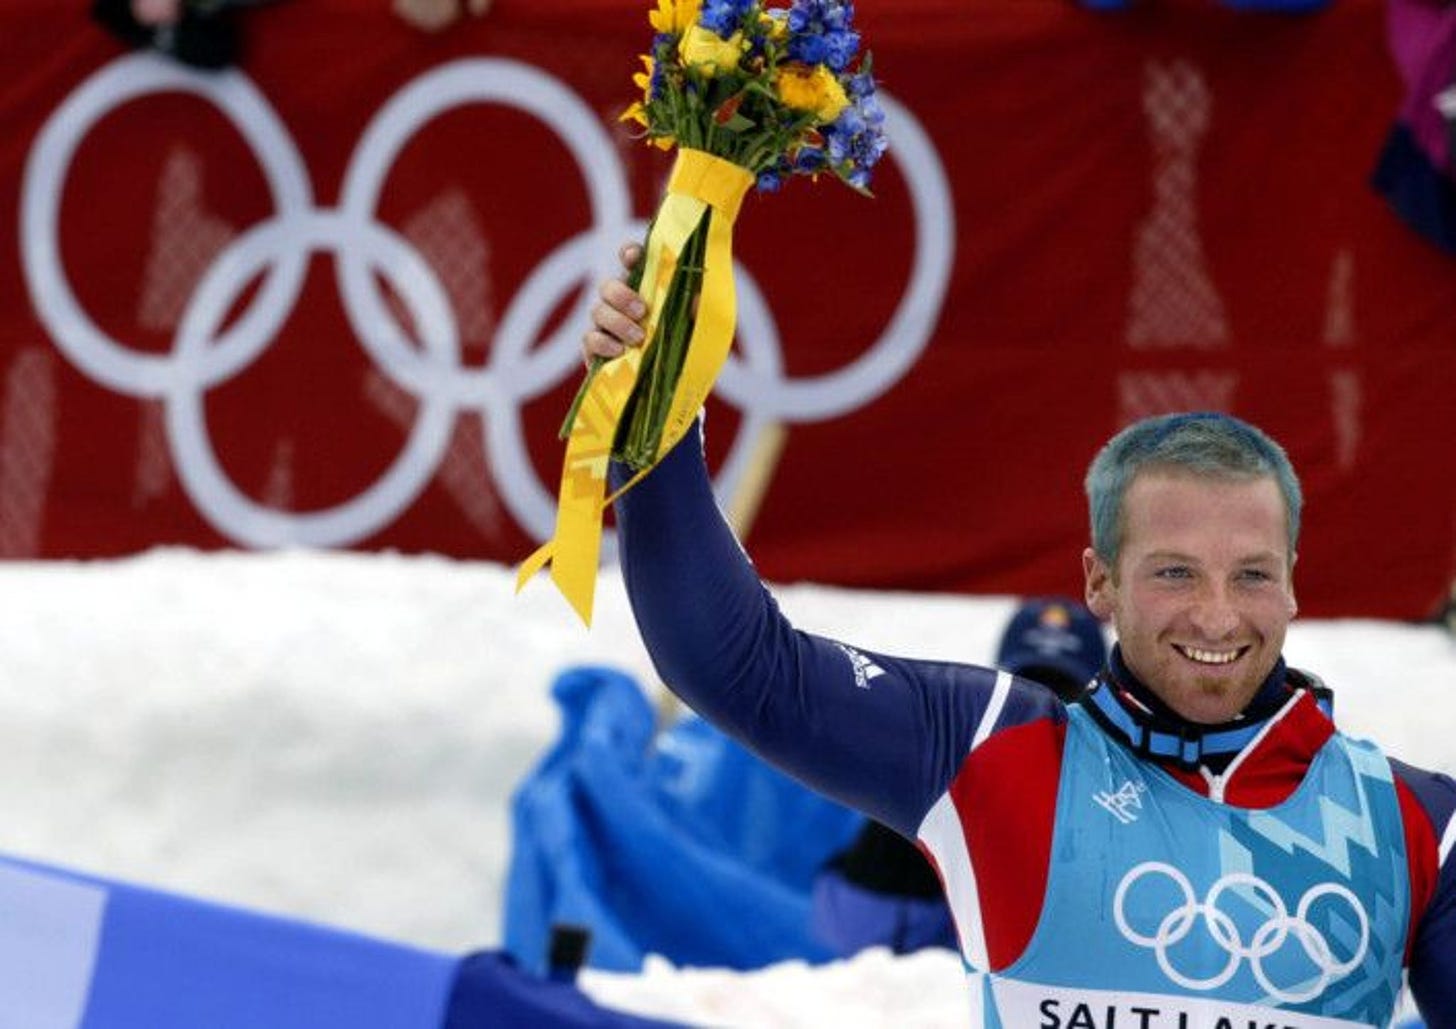 Campaign to return Olympic medal to Alain Baxter | The Scotsman